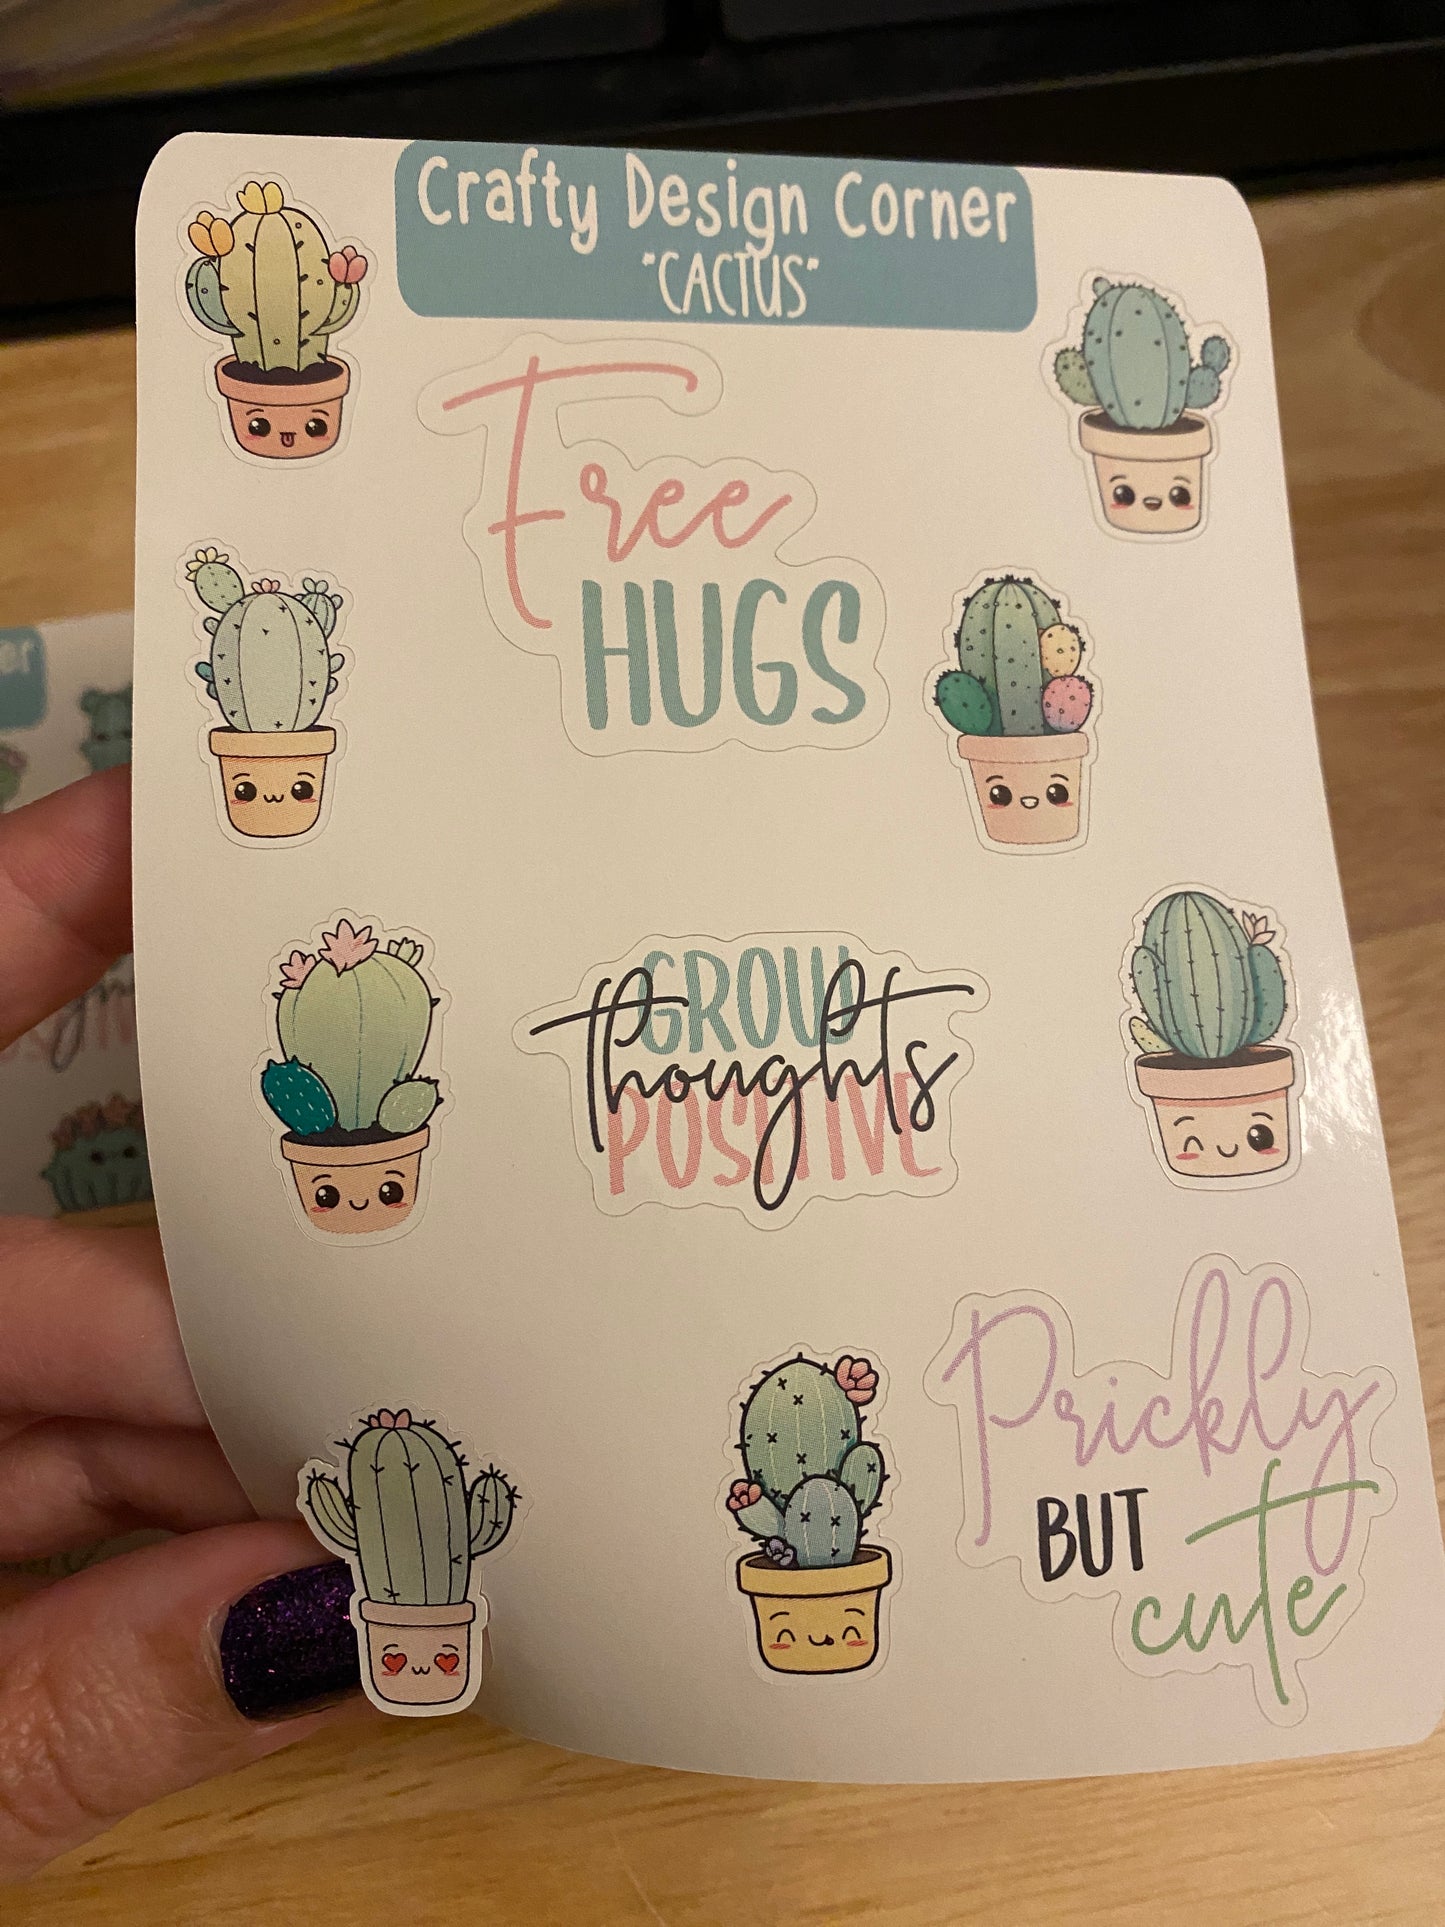 Two Sheets of Cute Cactus Face Stickers, Cactus with faces Sticker SHEET, Planner Sticker, Kawaii Cactus Sticker Sheet , Cactus Stickers, Kawaii Cactus Sticker Sheet